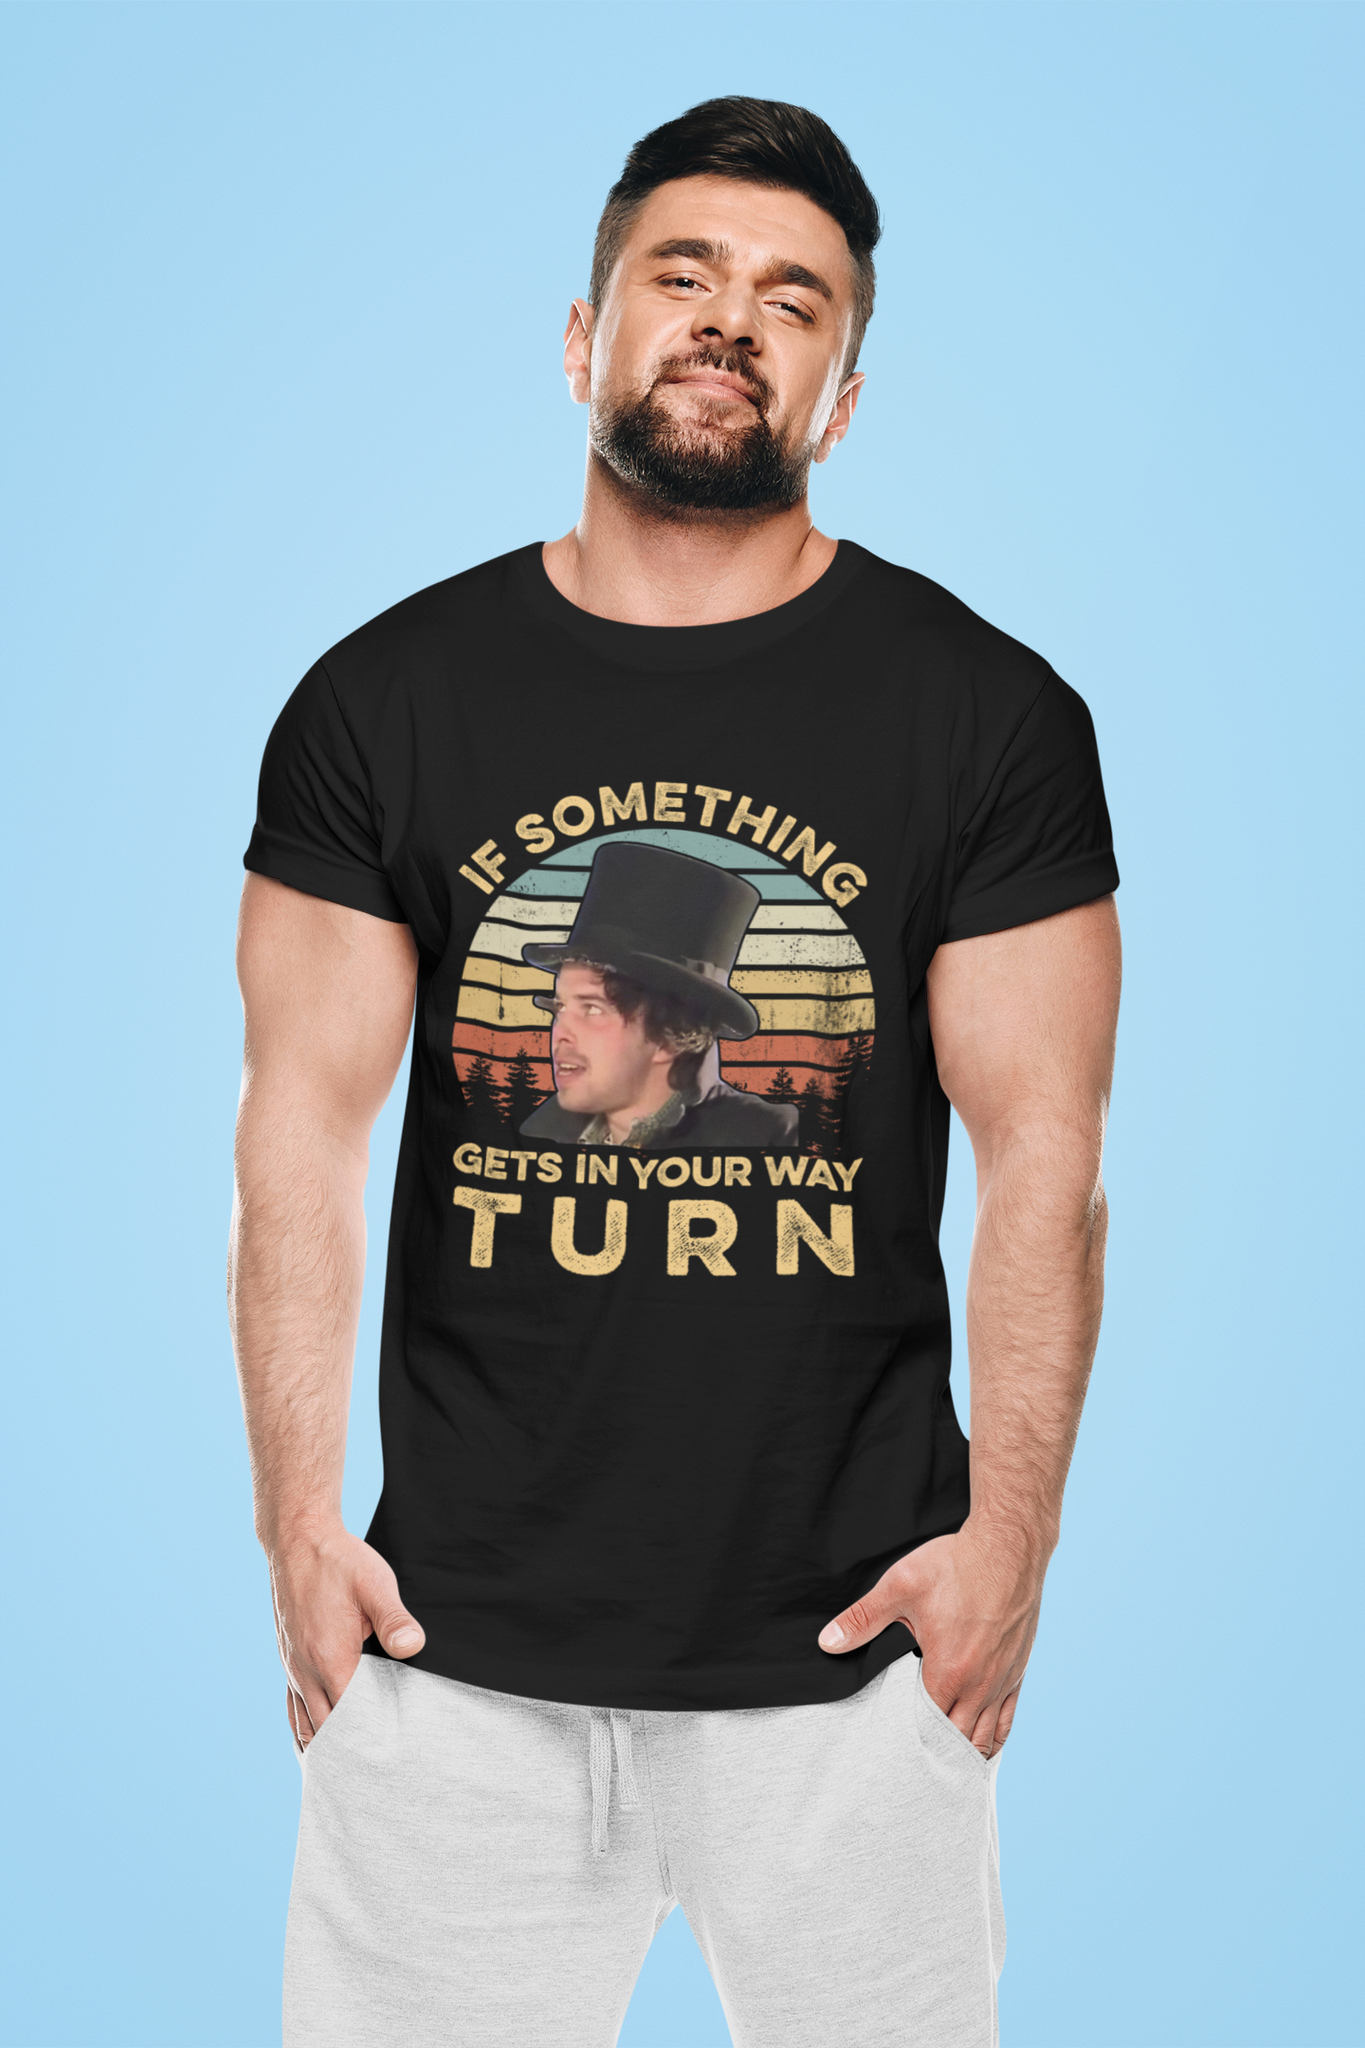 Better Off Dead Vintage T Shirt, Charles De Mar T Shirt, If Something Gets In Your Way Turn Tshirt